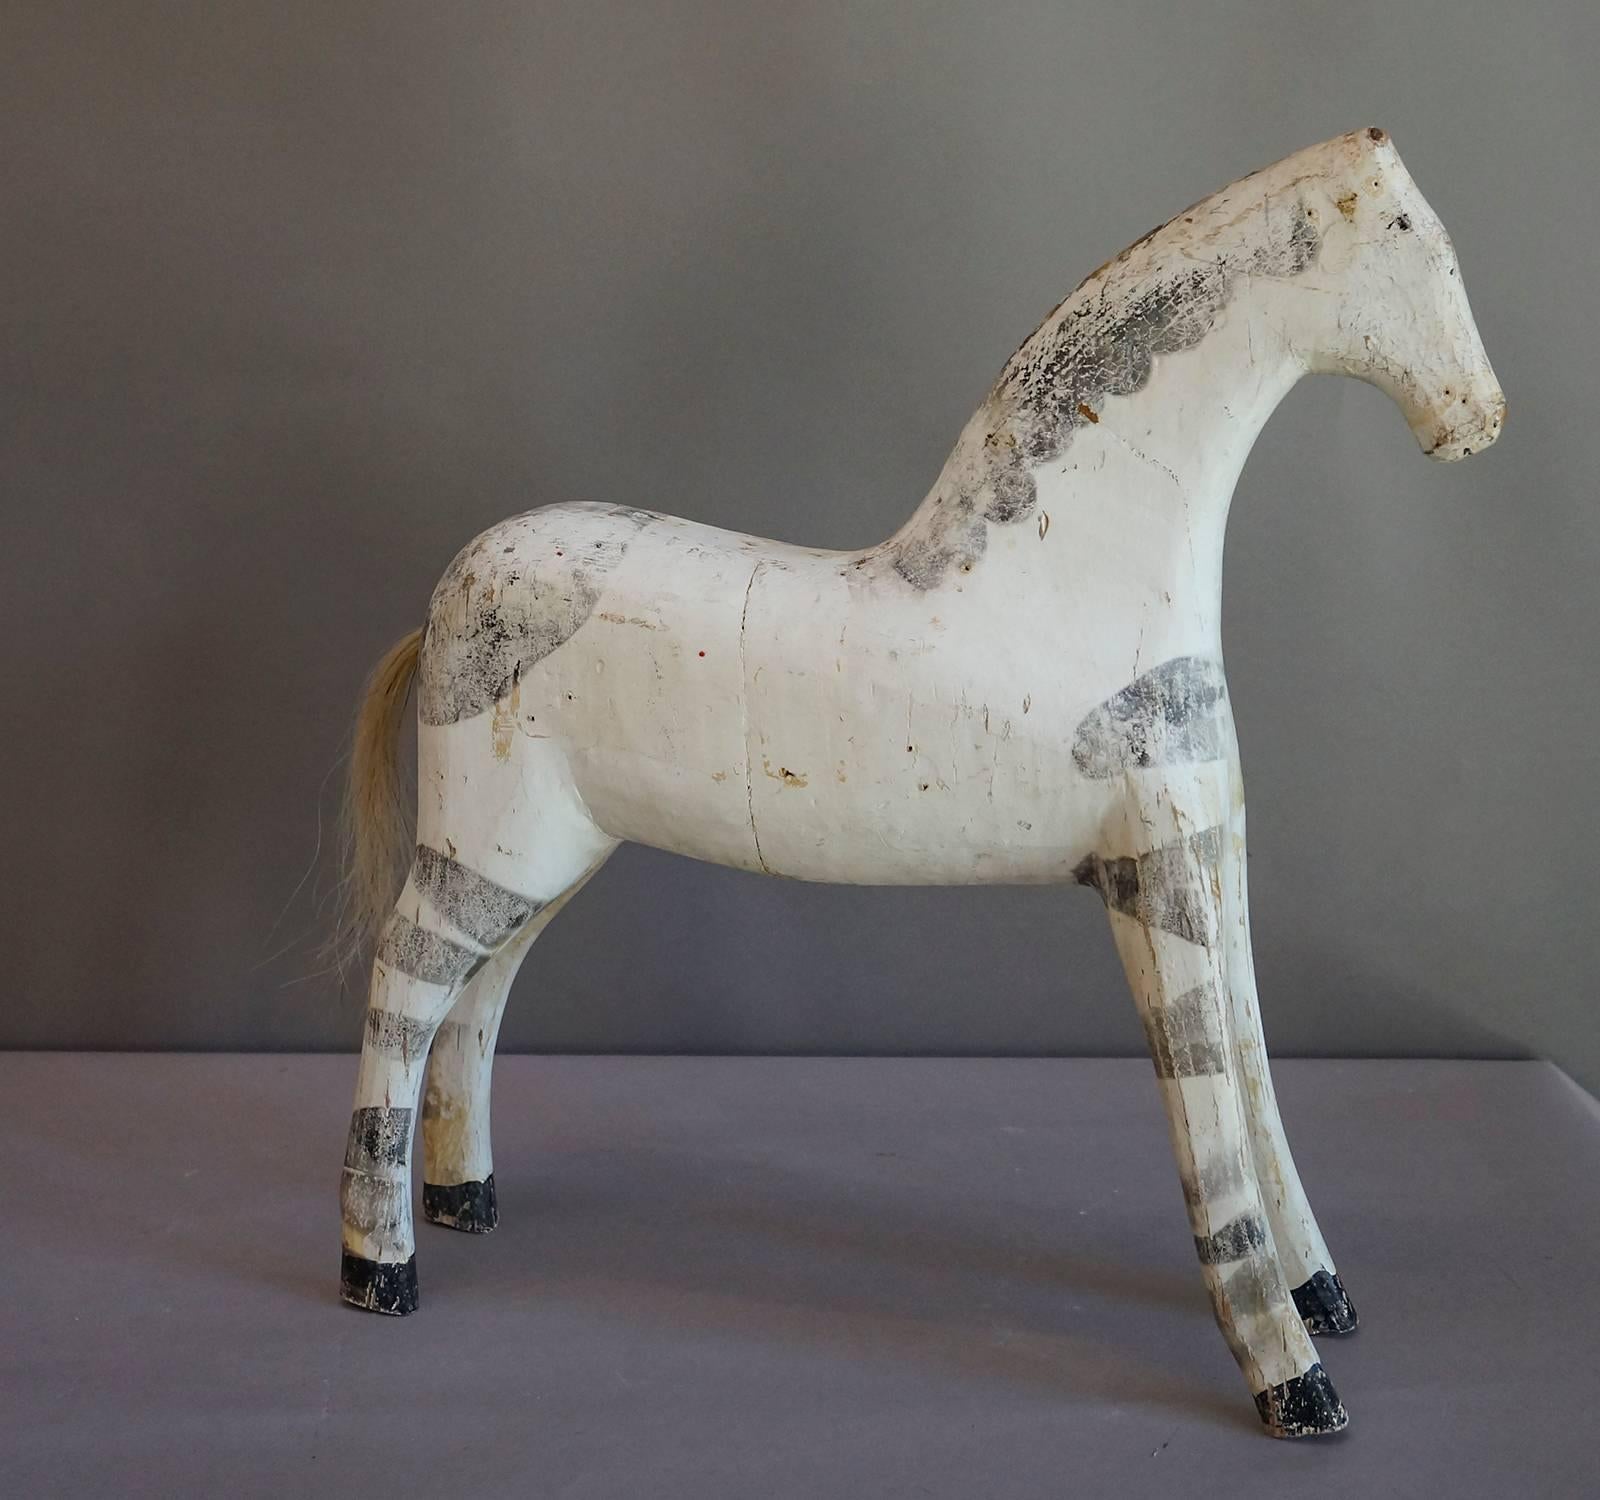 Primitive horse carving, Sweden, circa 1880, finished with grey paint made from fireplace ashes. Real horsehair tail. This horse, the only one of its kind we have seen, is truly a charmer.